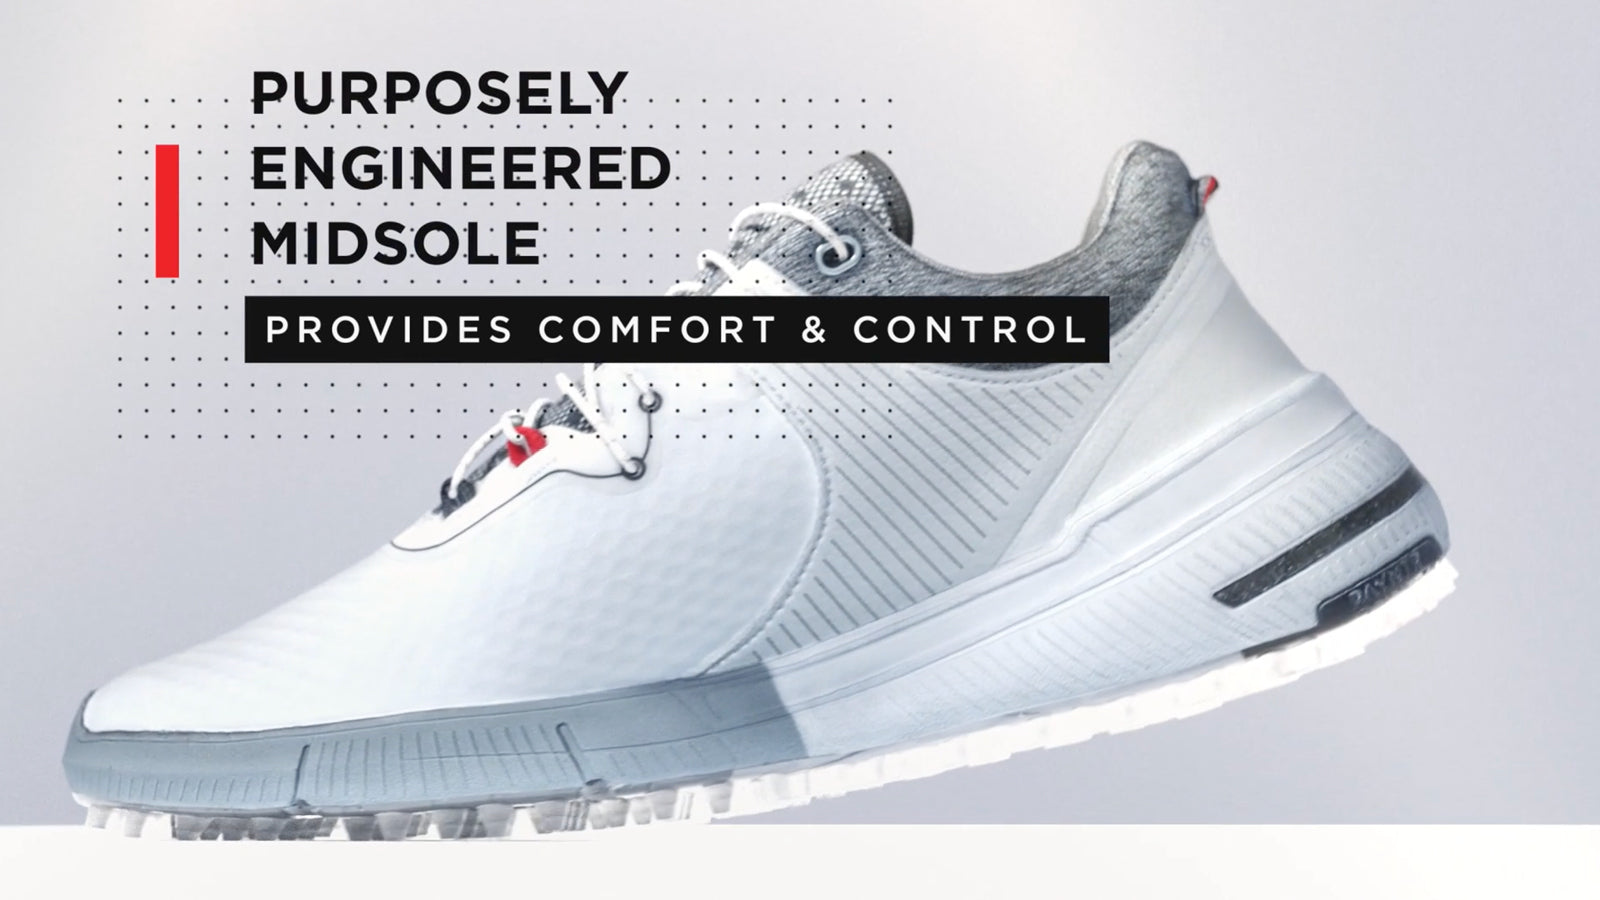 Load video: CGI showing how the midsole provides comfort in the PAYNTR X-001 F